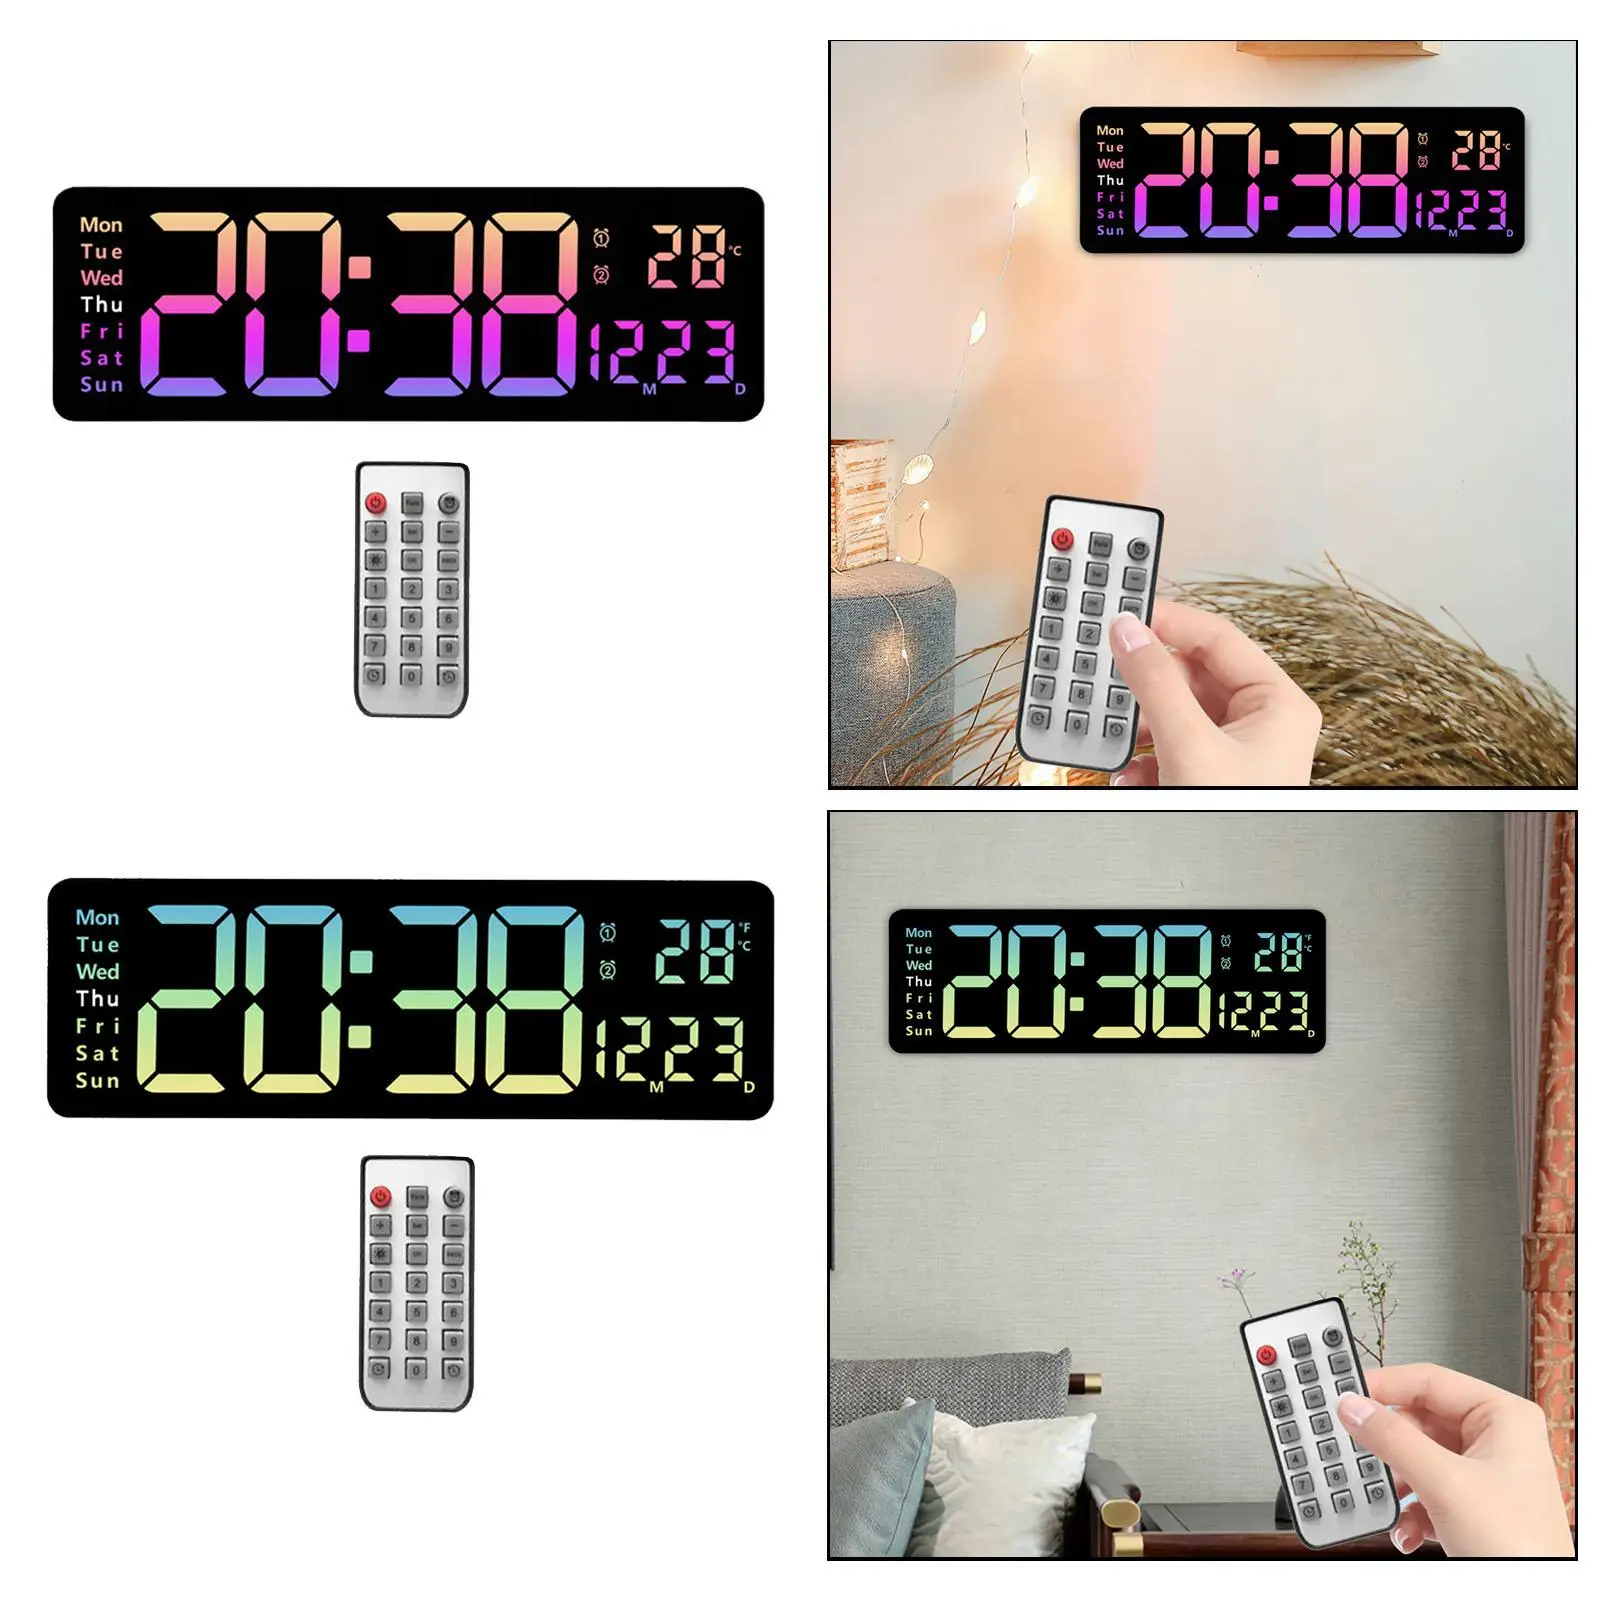 LED Desktop Alarm Clock with Remote Control Temp 16inch Digital Clock Wall Clock for Bedroom Office Learning Living Room Beside